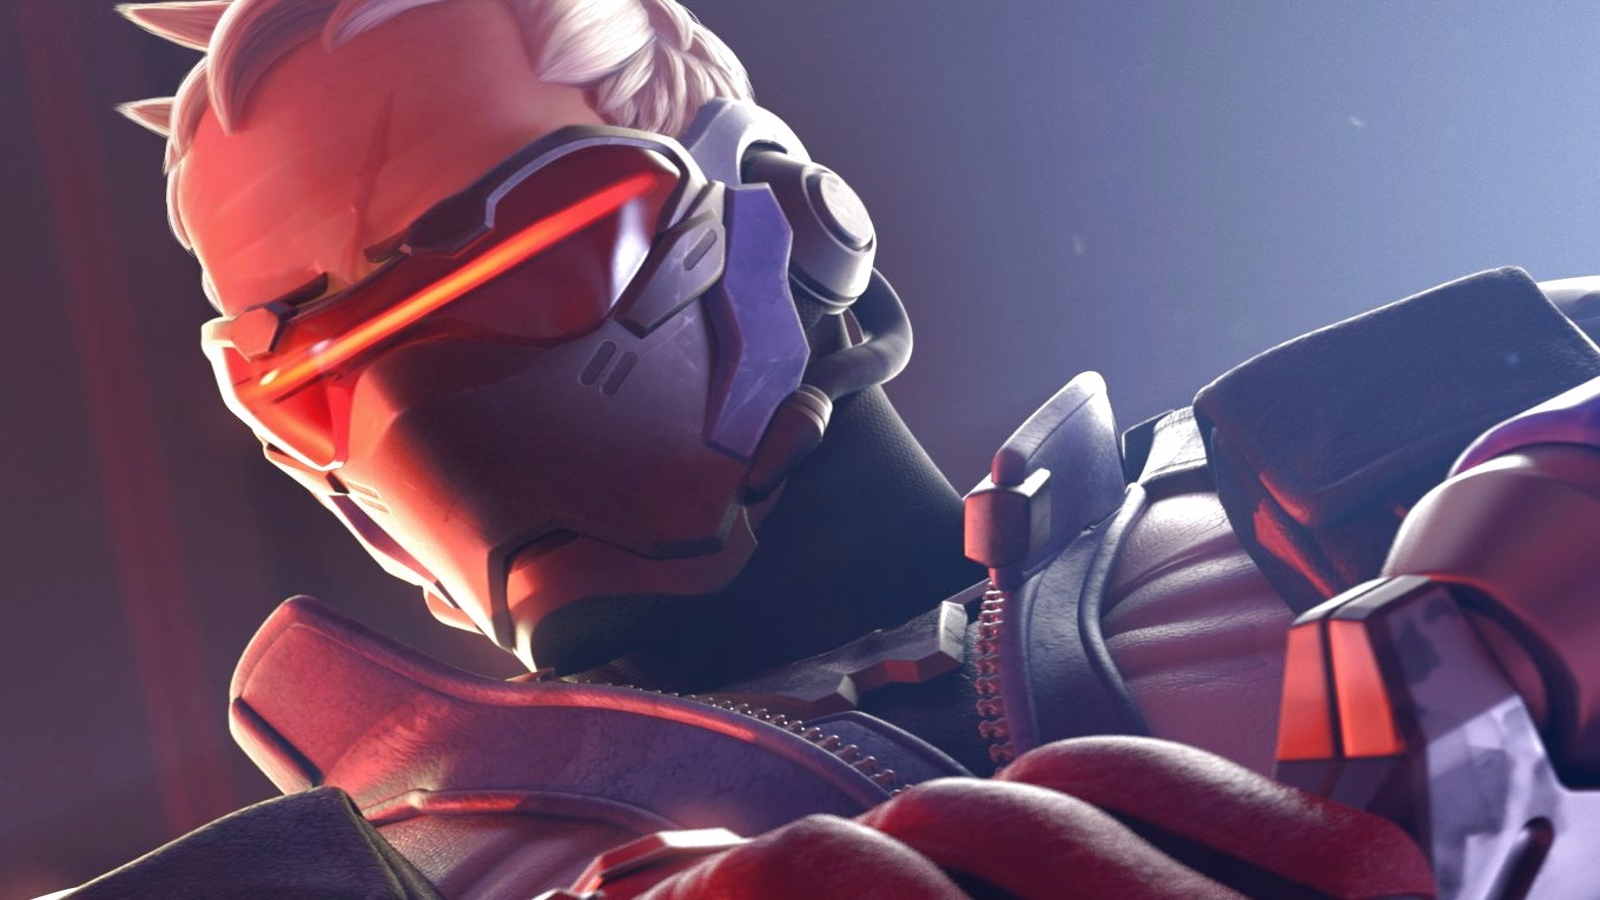 Overwatch Widowmaker Heroes of the Storm Video game Wiki, others